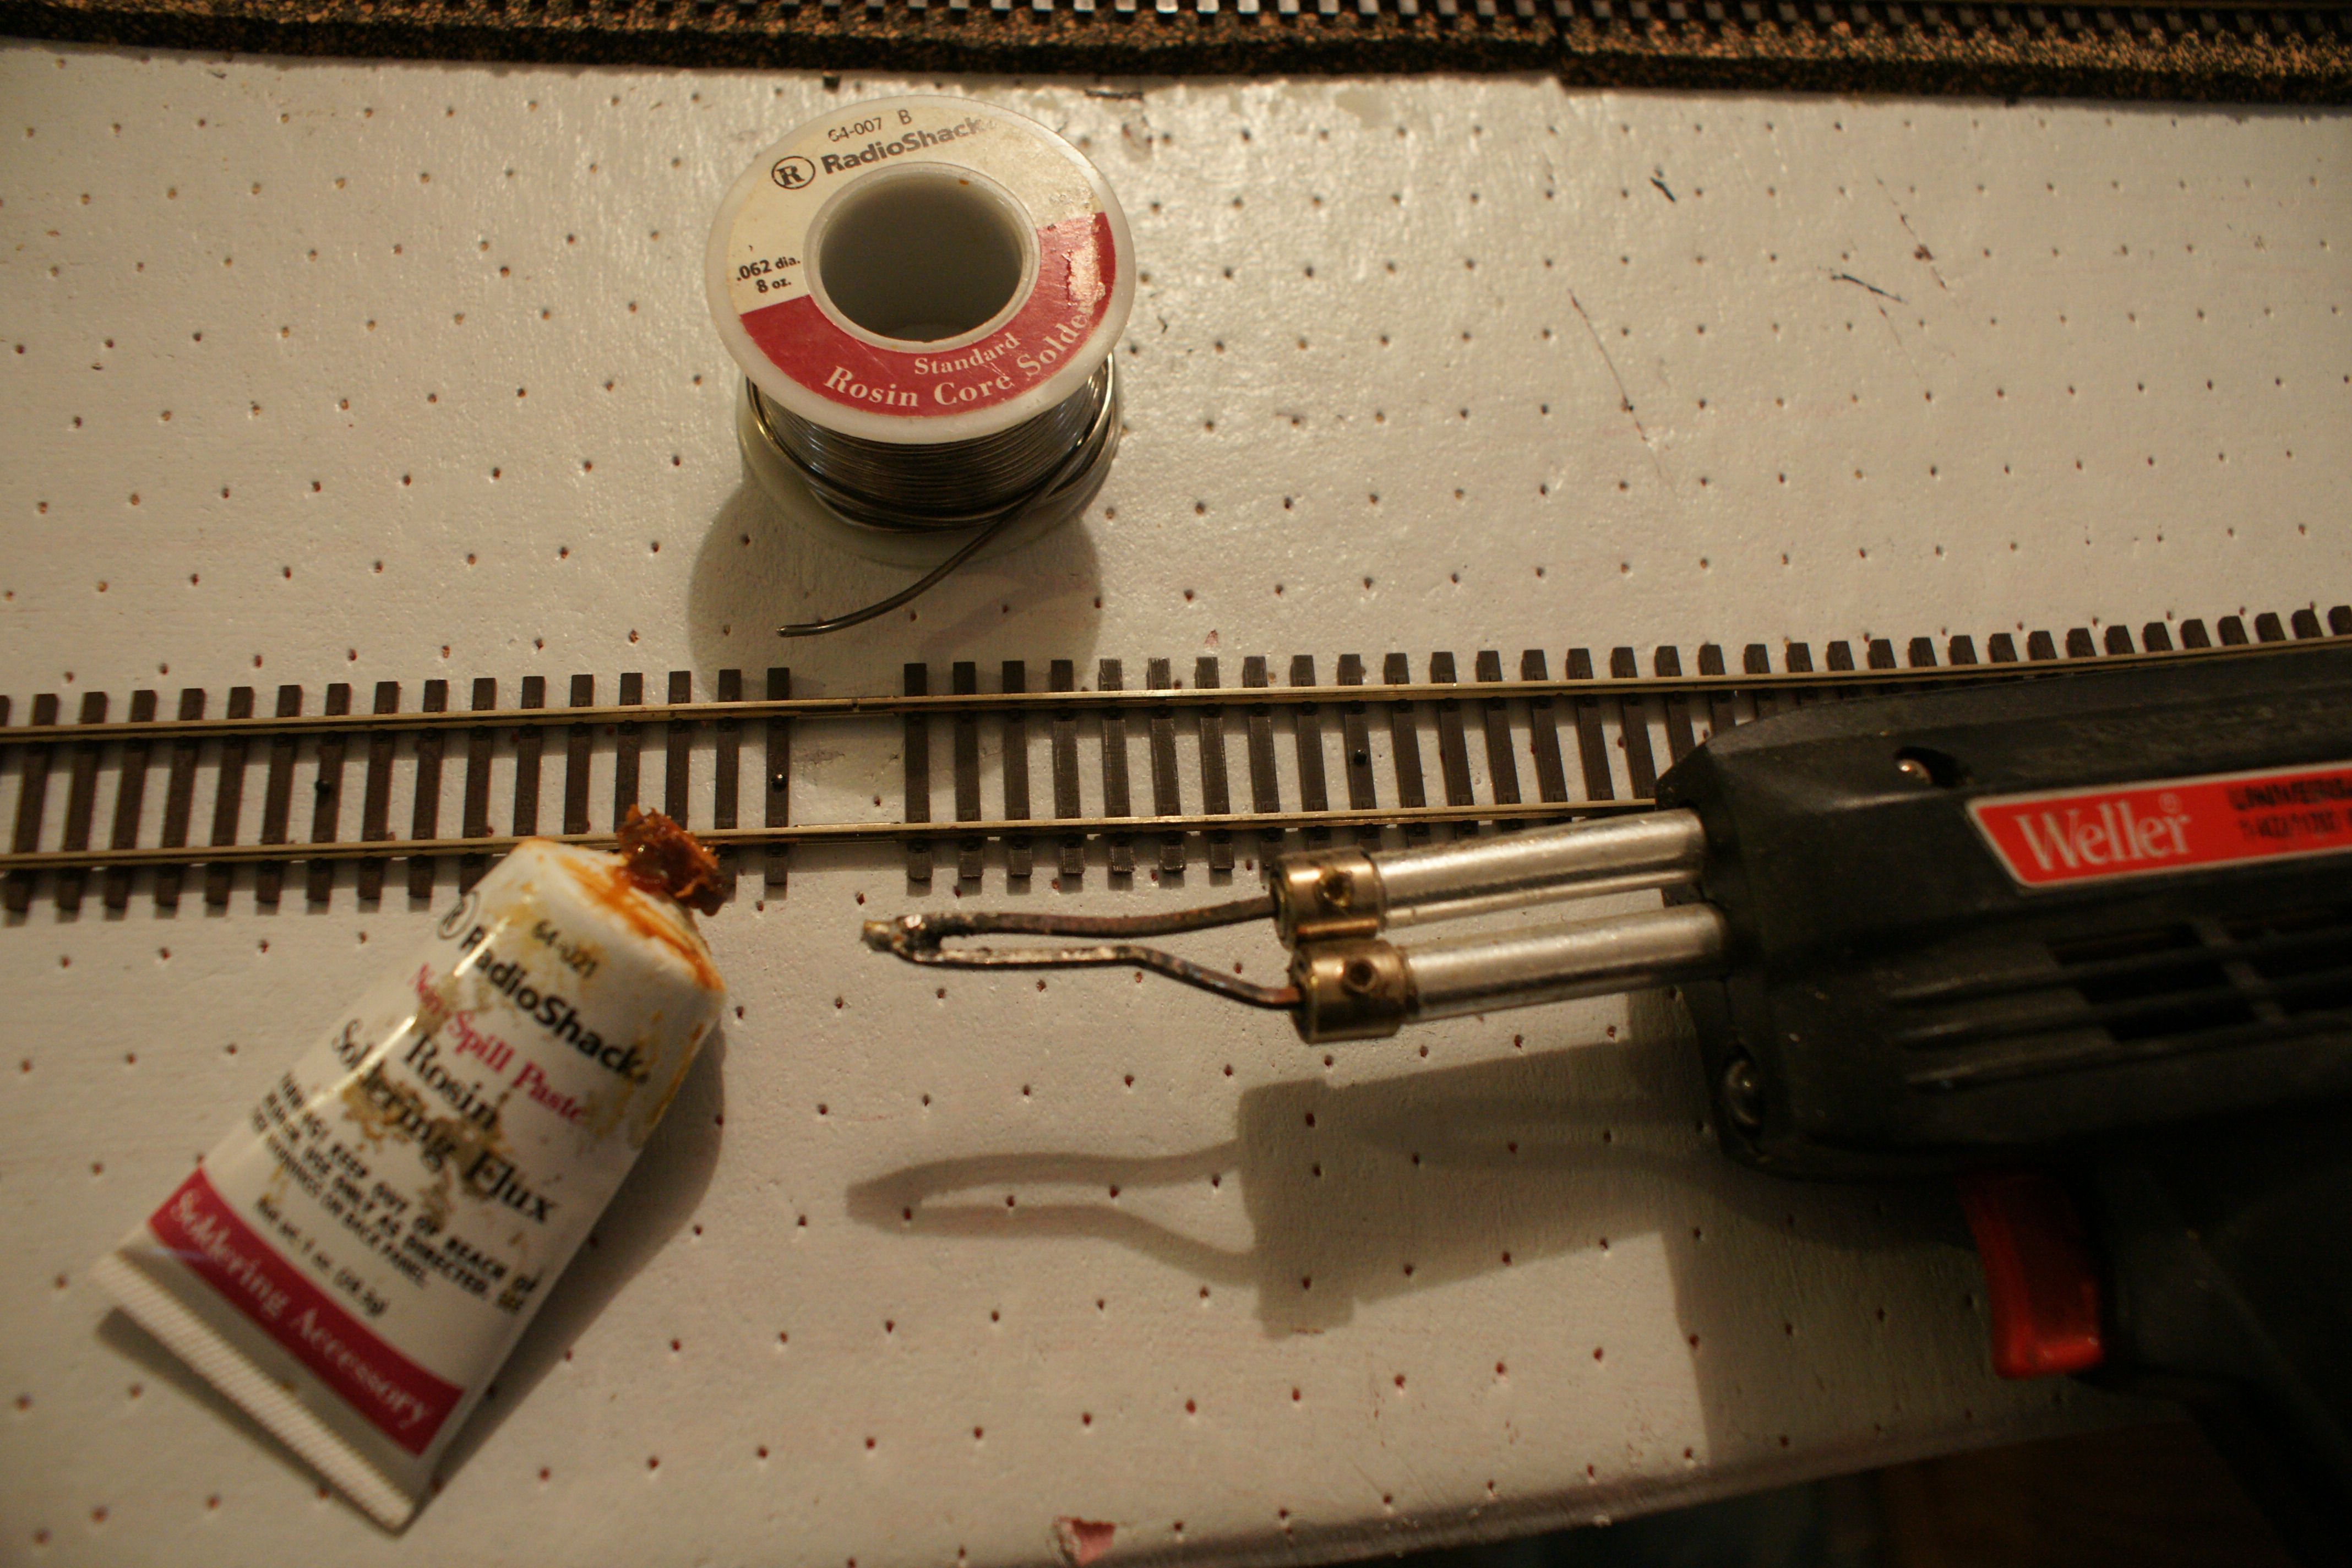 Download Introduction to Soldering for Model Railroad Trains